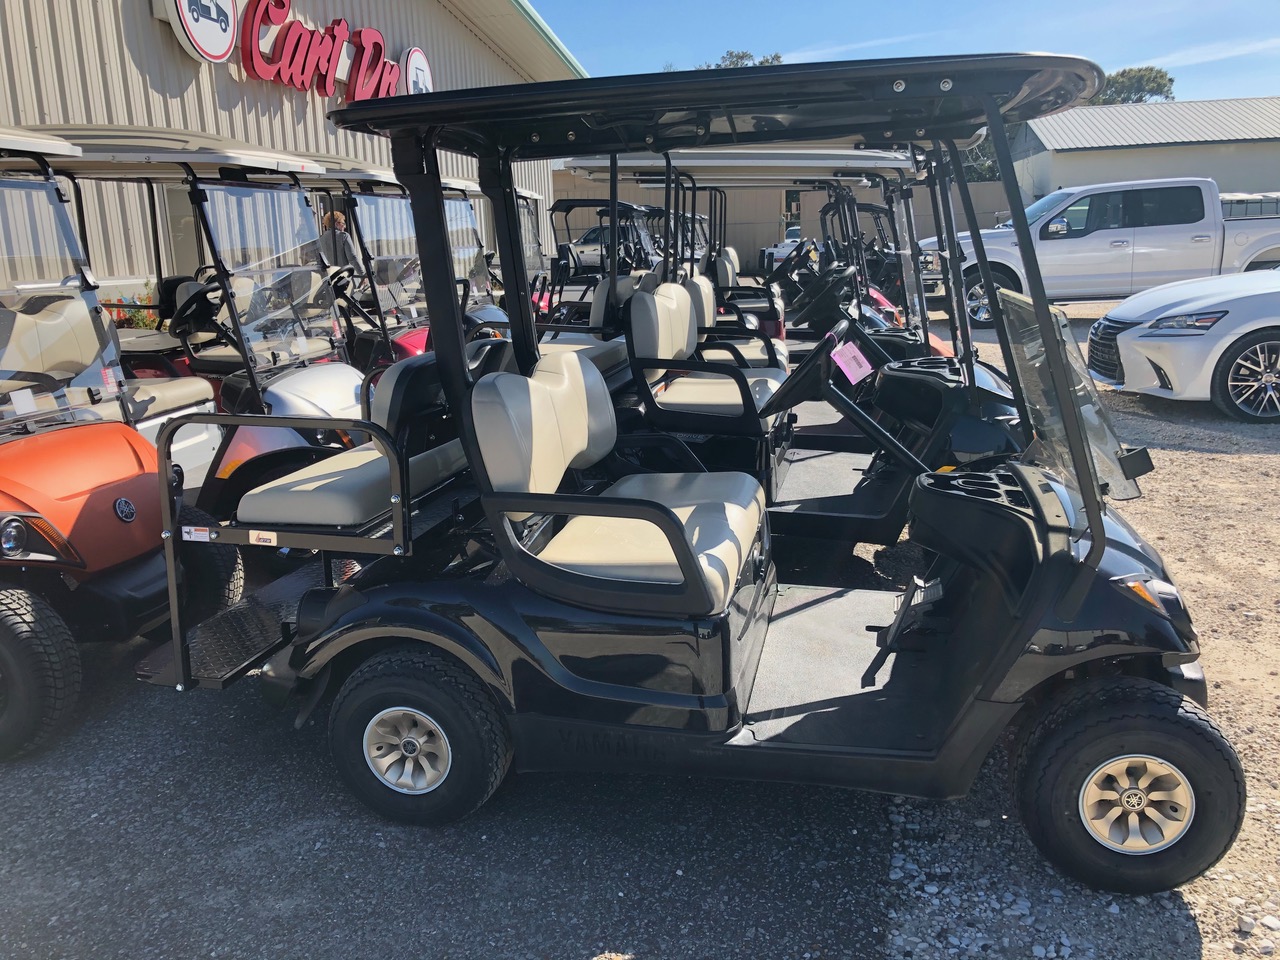 Own Your Ride: Discover Used Golf Carts for Sale by Owners in Shelby, Alabama